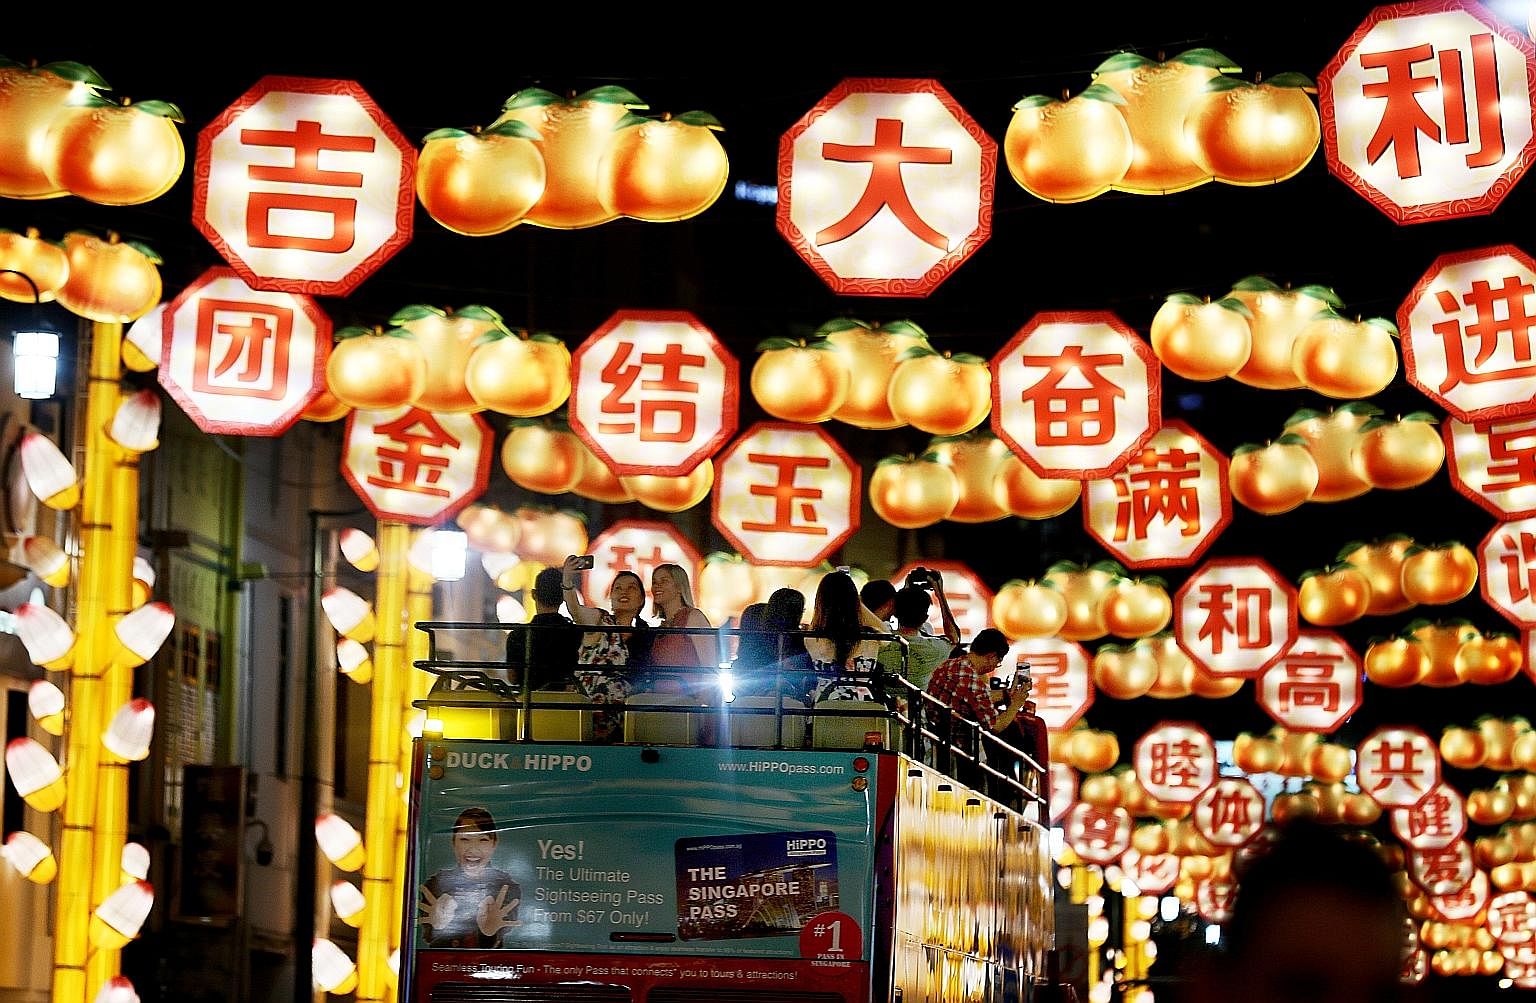 The annual festive light-up, which will kick off this year's Chinatown celebrations for Chinese New Year, features 2,188 handcrafted lanterns, of which 88 depict dogs to mark the Year of the Dog. The lanterns were designed in collaboration with the S